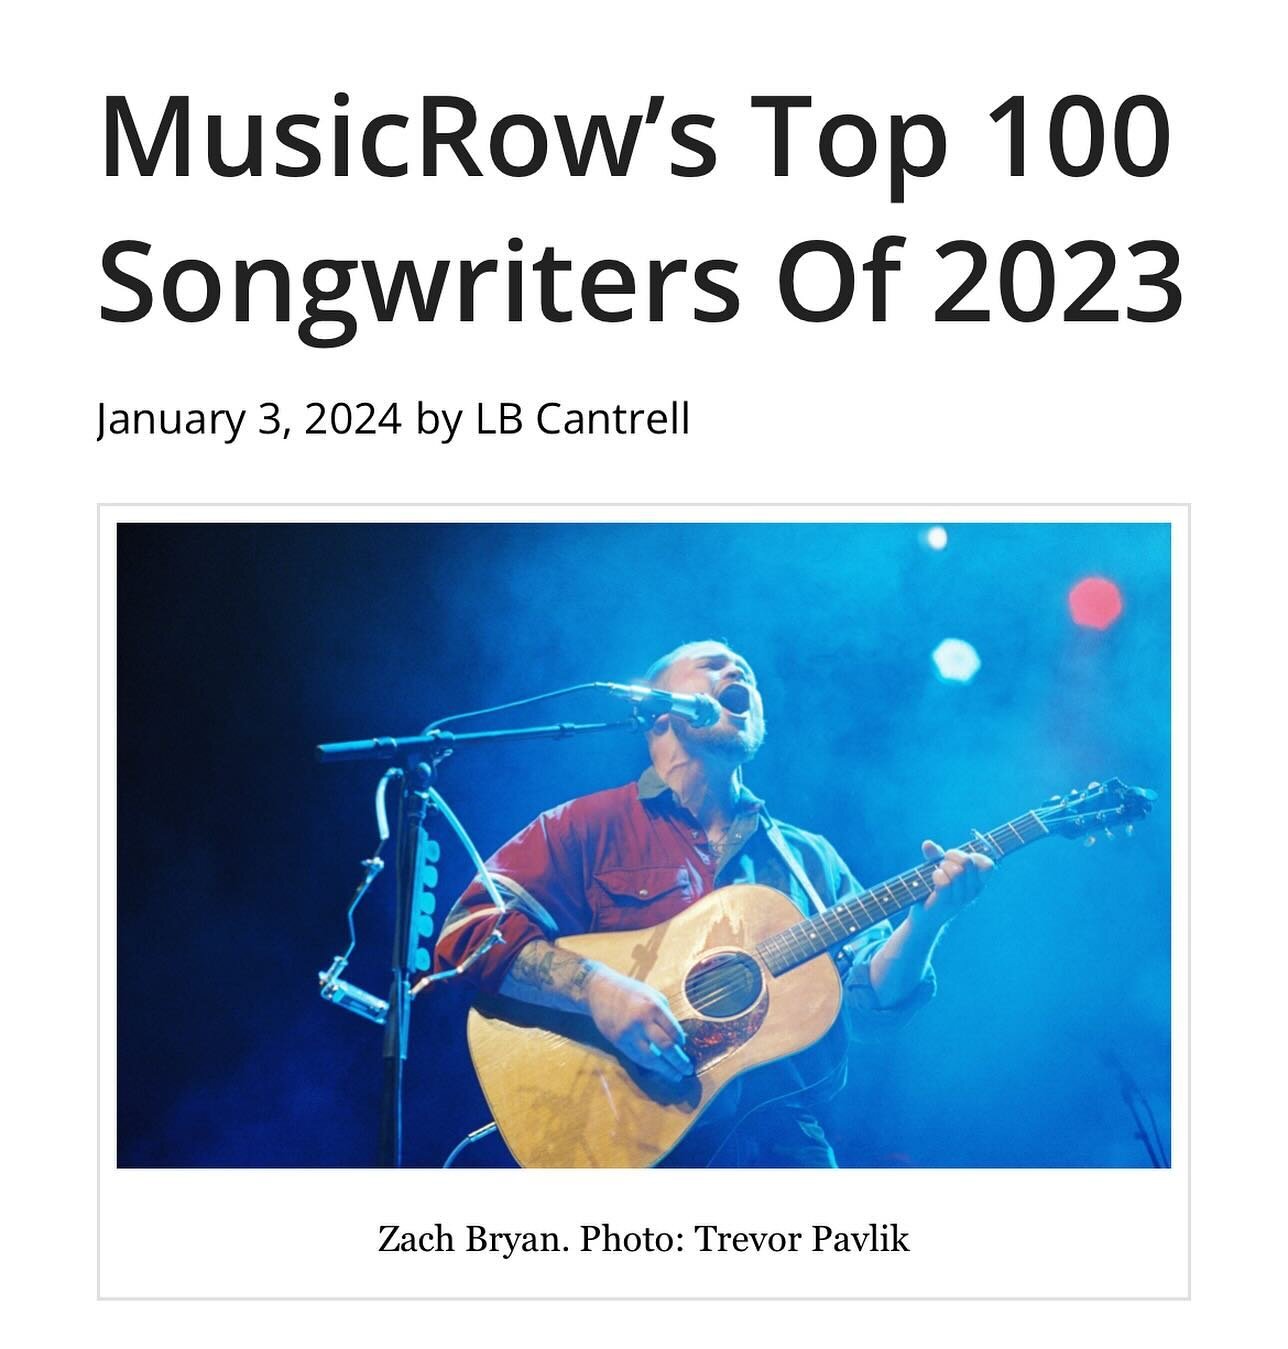 Congratulations Ben on being named to MusicRow&rsquo;s Top Songwriters of 2023!! 🎉🎉